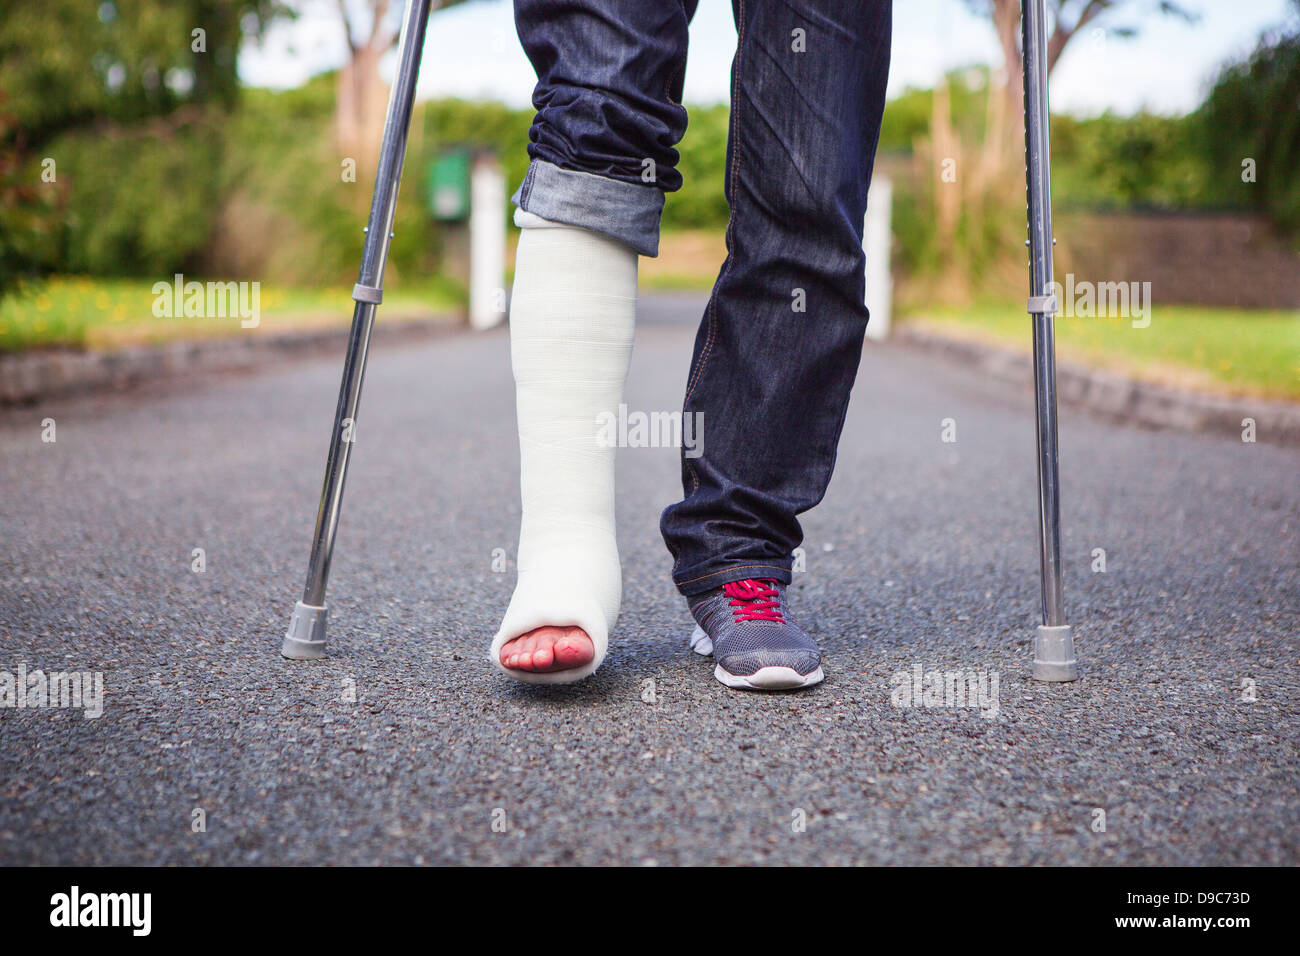 Image of someone standing with crutches because of broken ankle. Stock Photo